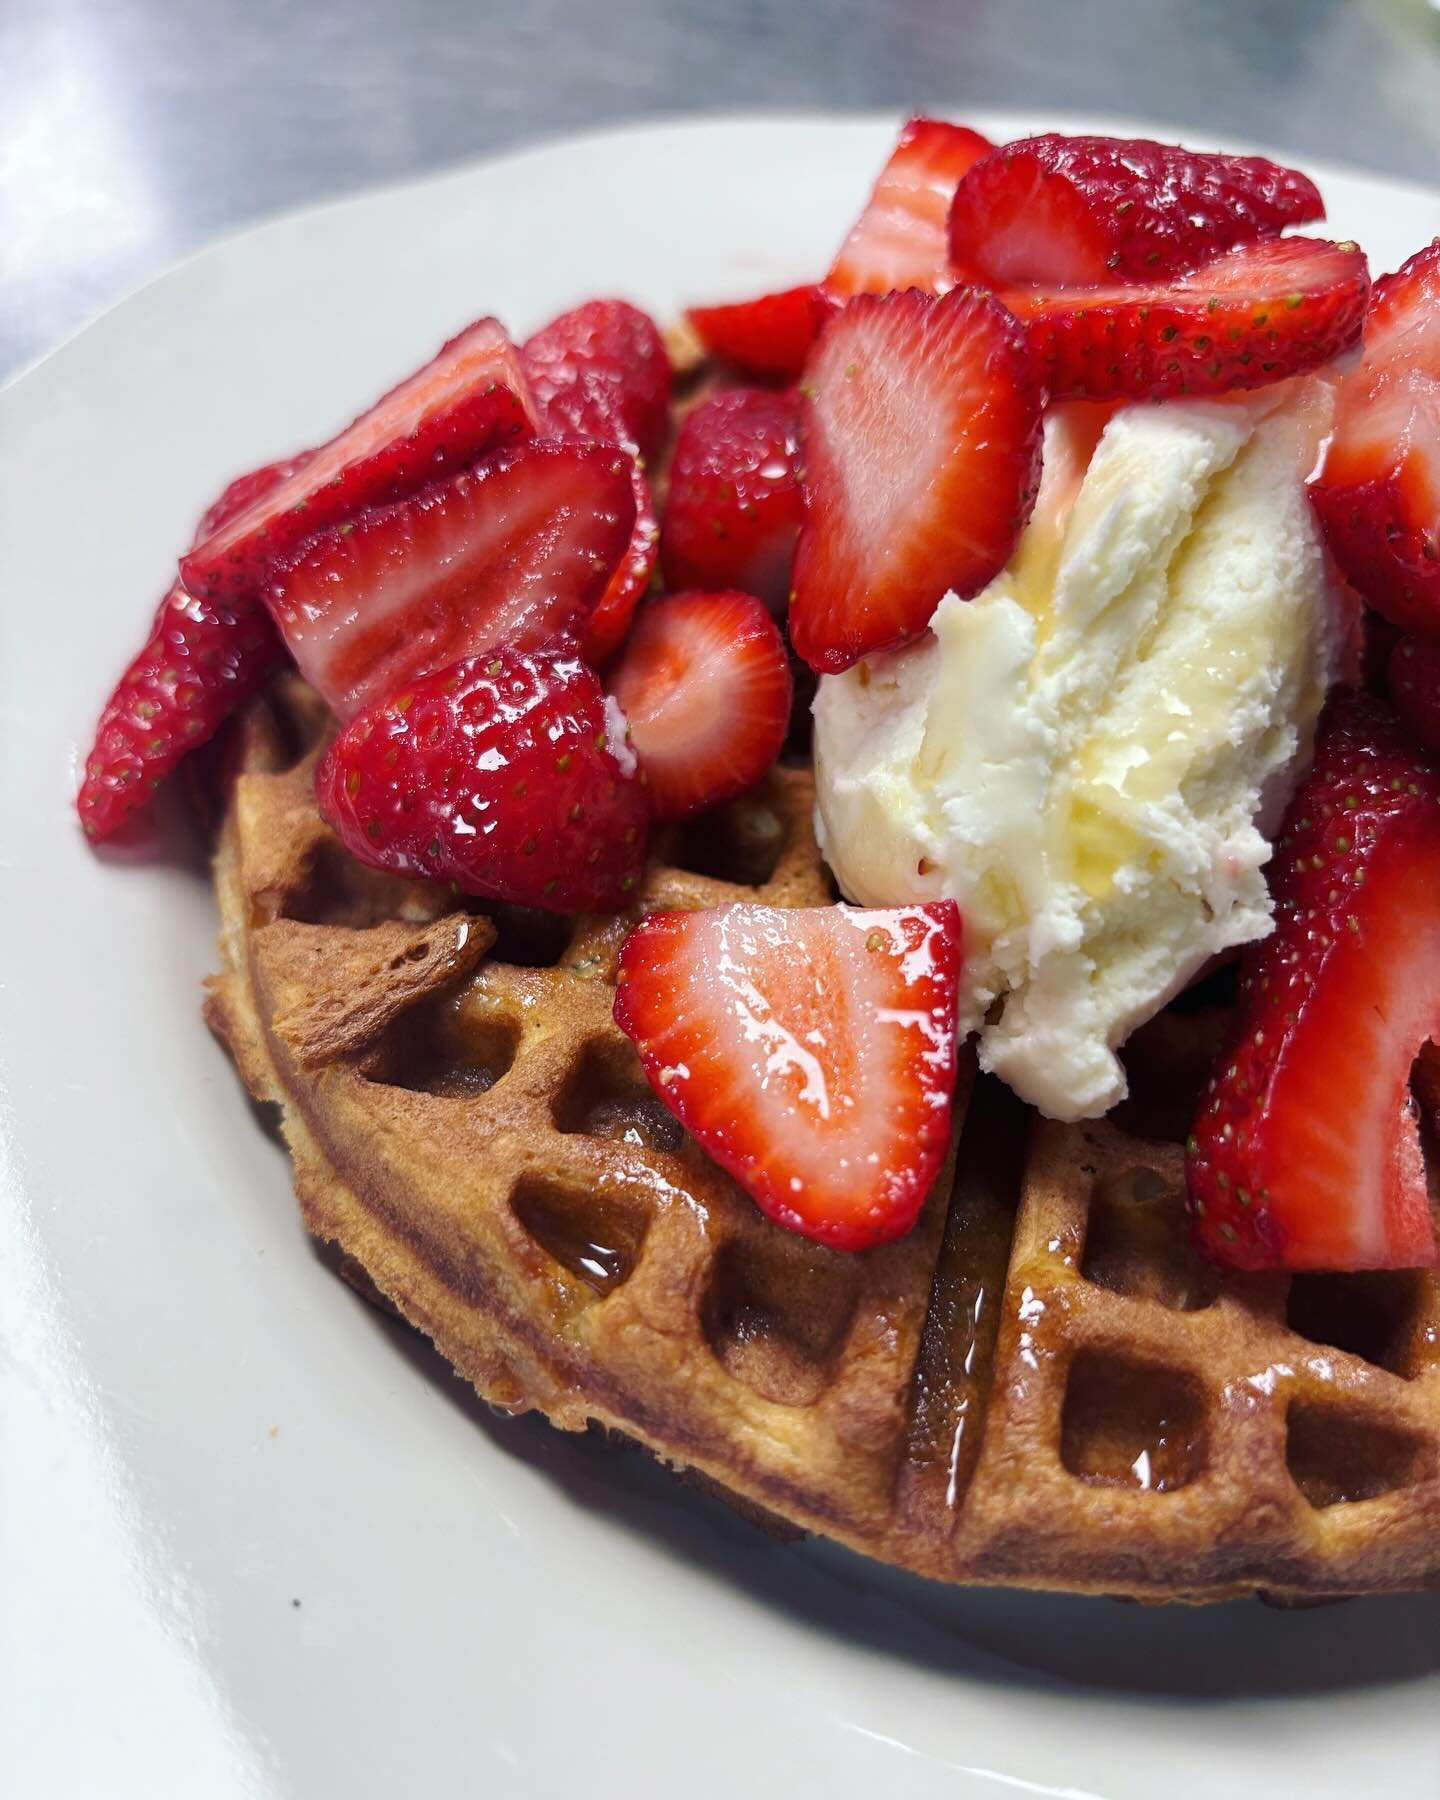 NeW seasonal fruit! 🚨 

Strawberries with whipped mascarpone and honey drizzle. Try it solo or on our delicious waffle!